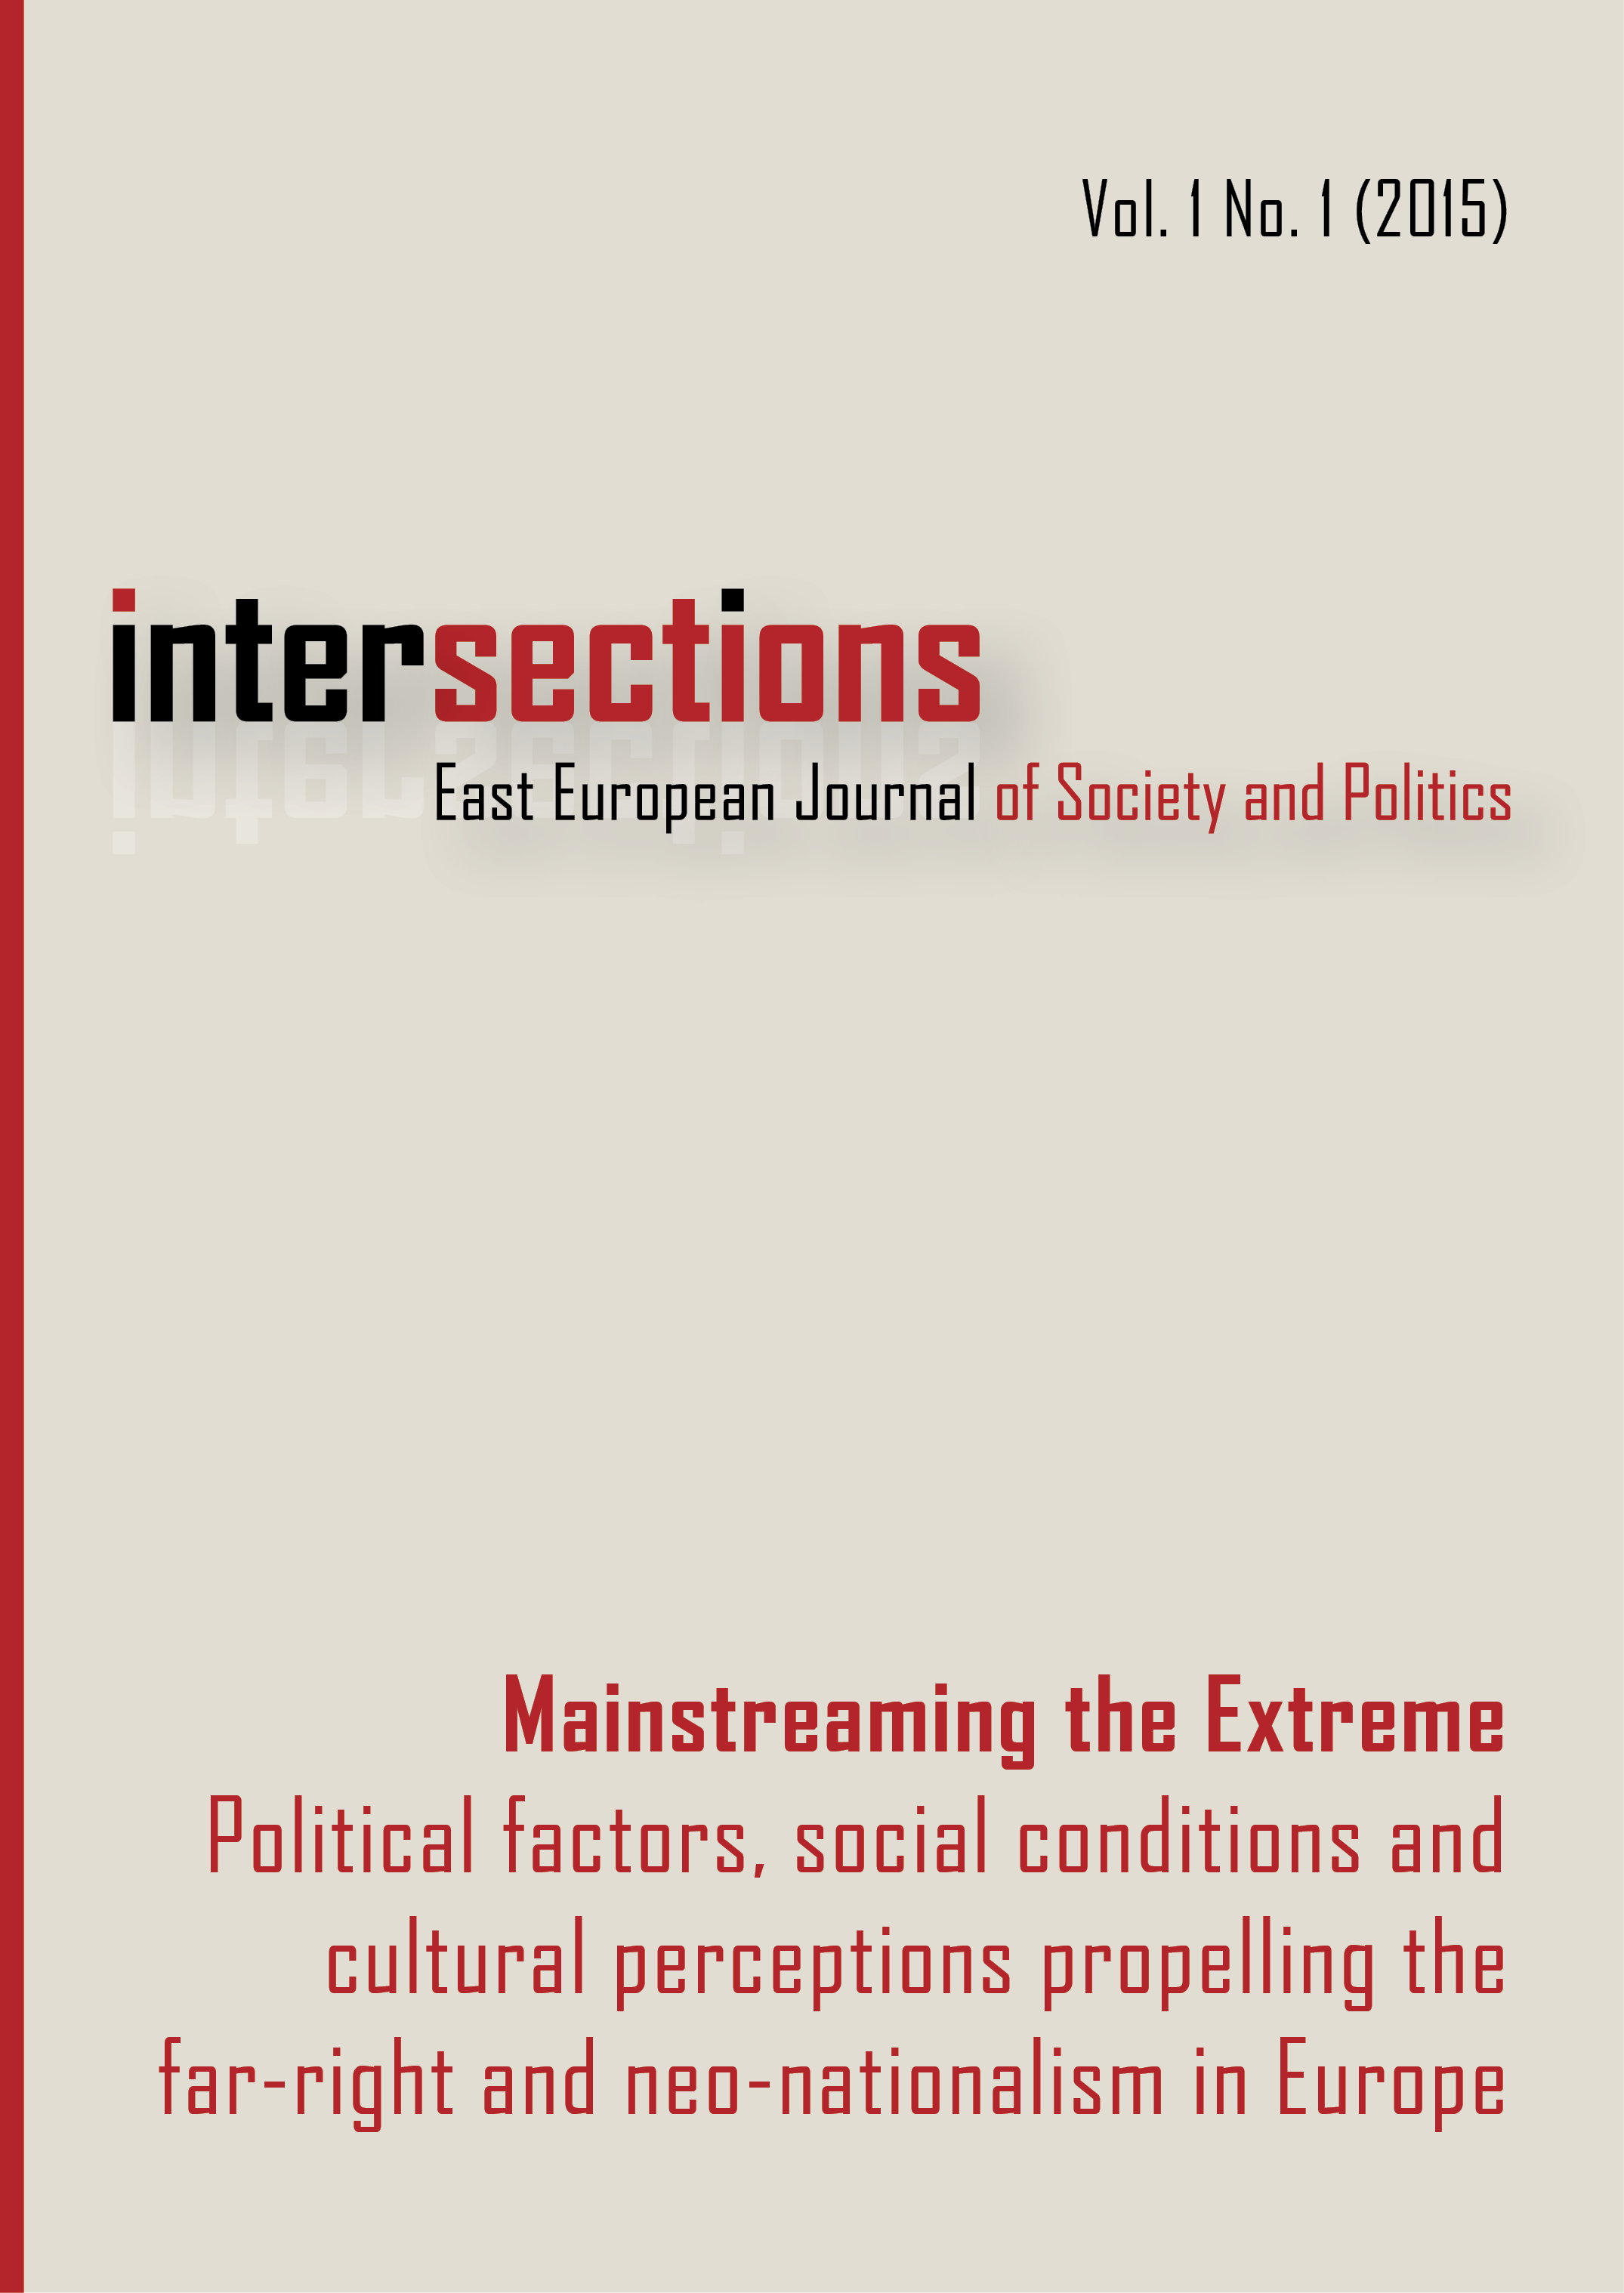 					View Vol. 1 No. 1 (2015): Mainstreaming the Extreme
				